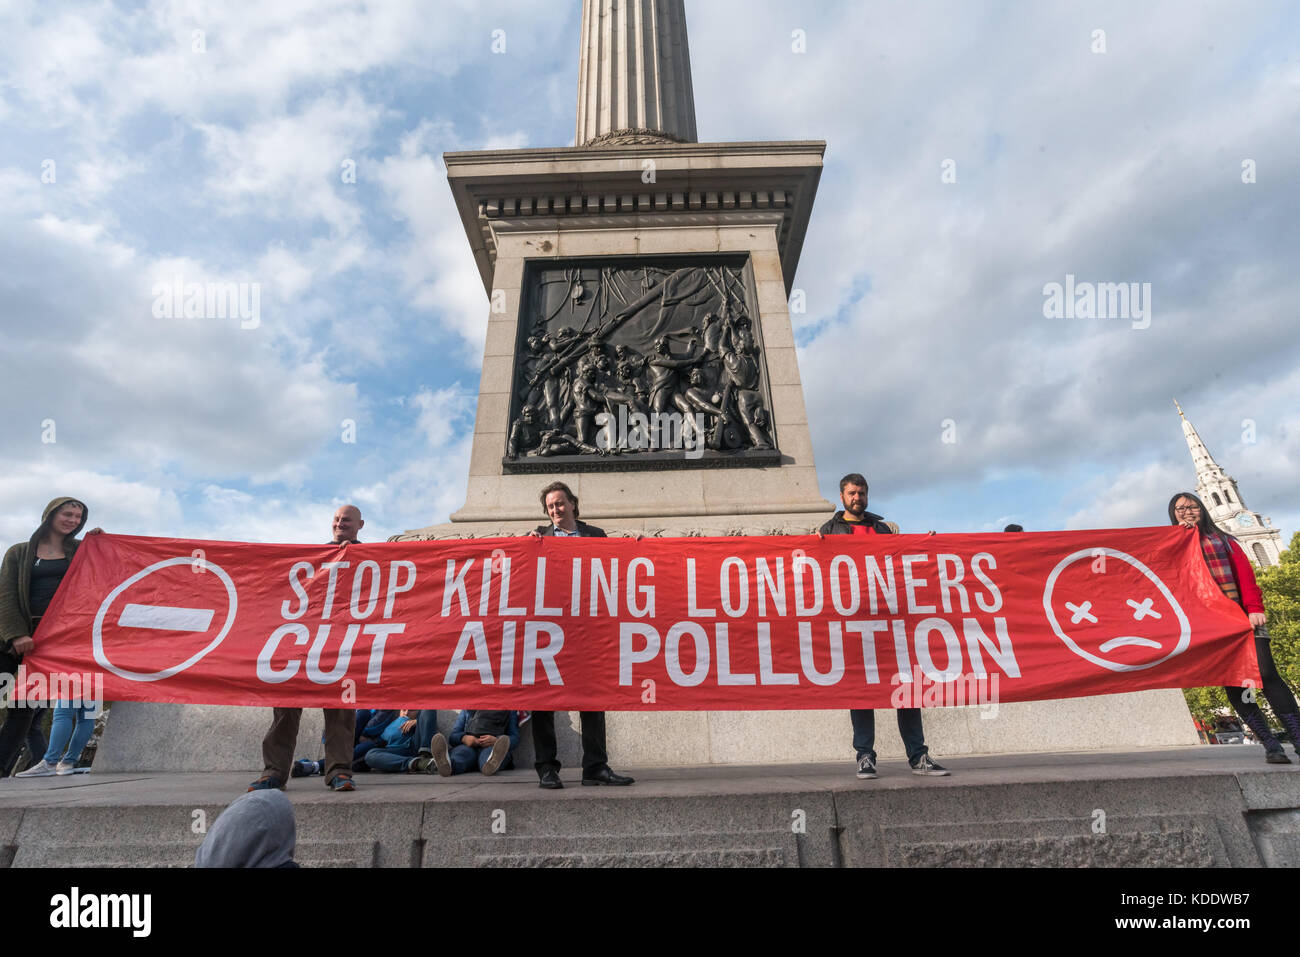 London, UK. 'Stop Killing Londoners: Cut Air Pollution' campaigners pose in Trafalgar Square on a day of protests in some of London's most polluted streets. Earlier they had briefly blocked Tower Bridge. Their series of protests took place as the London Assembly debated air quality measures and sent them the message that the 10,000 early deaths of Londoners is a health emergency and that the politicians need to prioritise the lives of Londoners over the special interests of the car and oil companies. Credit: Peter Marshall/Alamy Live News Stock Photo